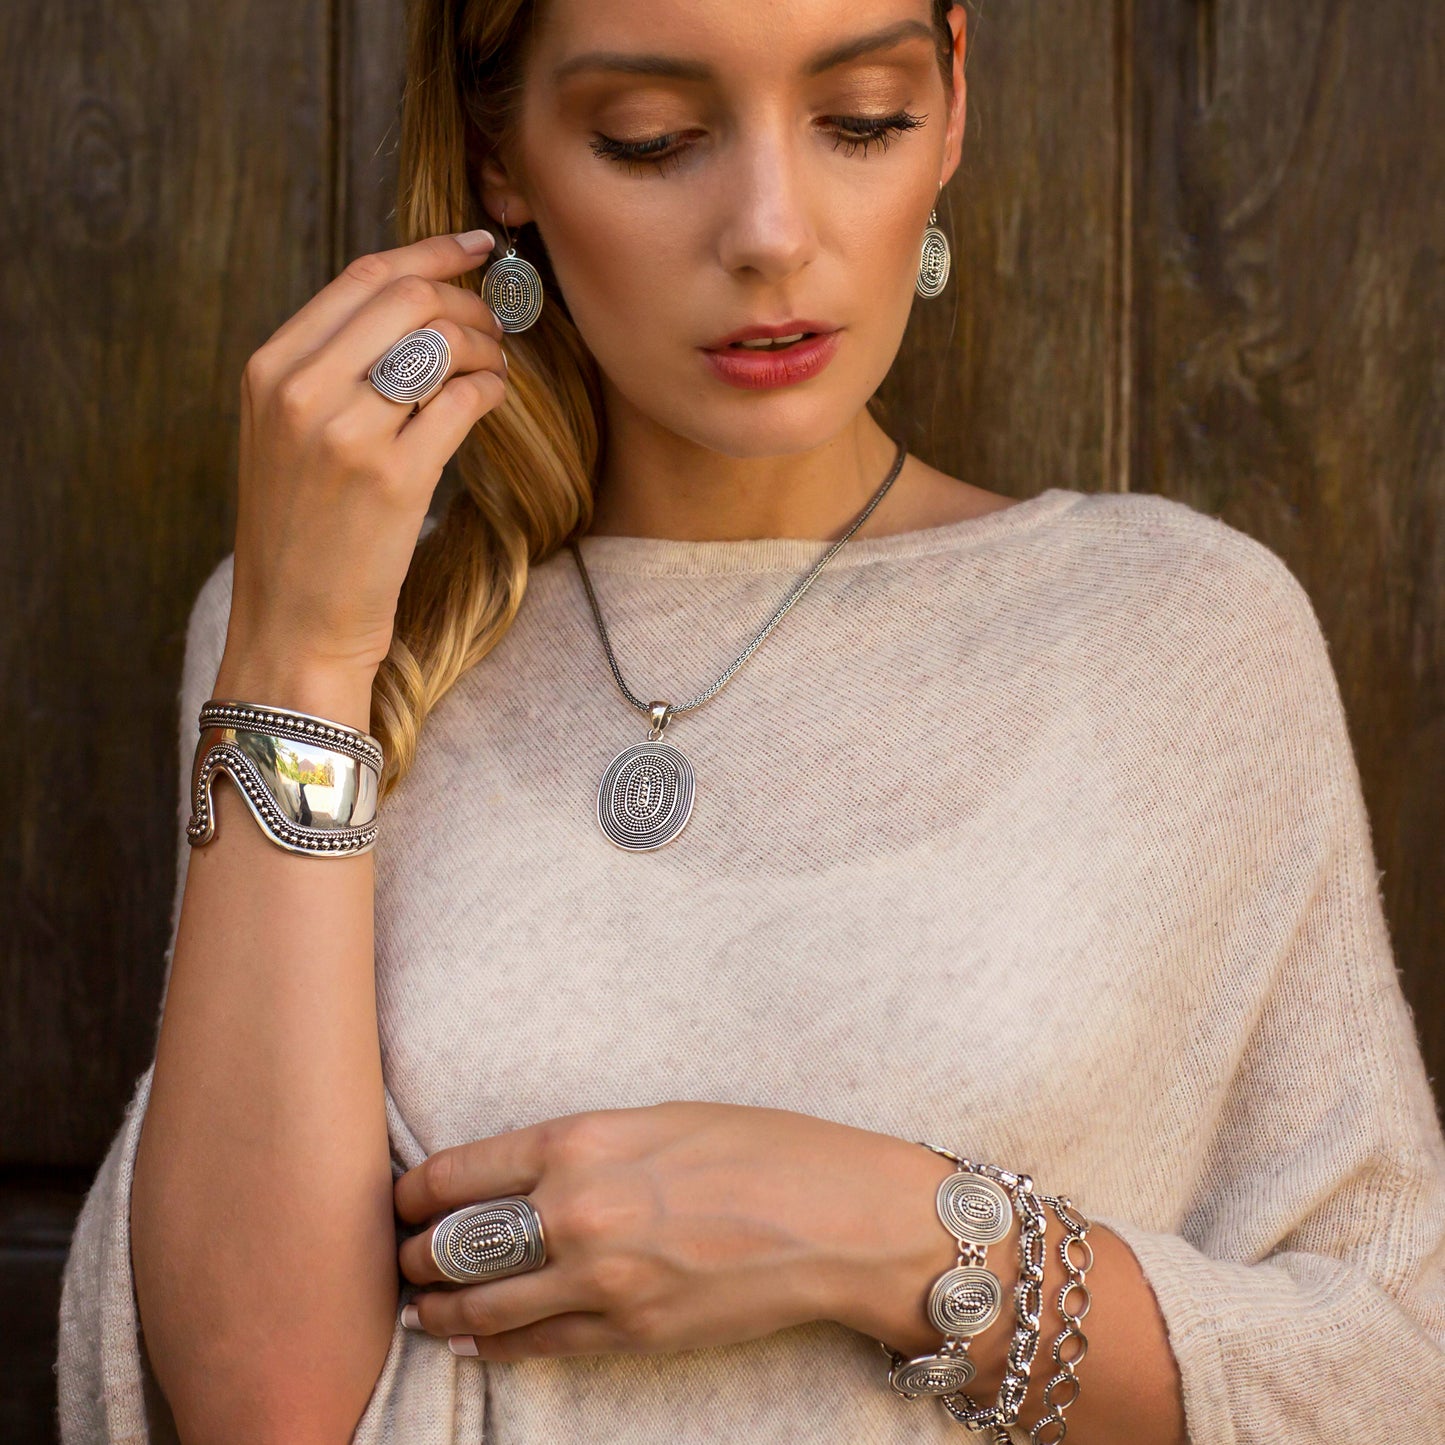 Woman wearing various silver jewelry including bracelets, rings, earrings and a pendant.